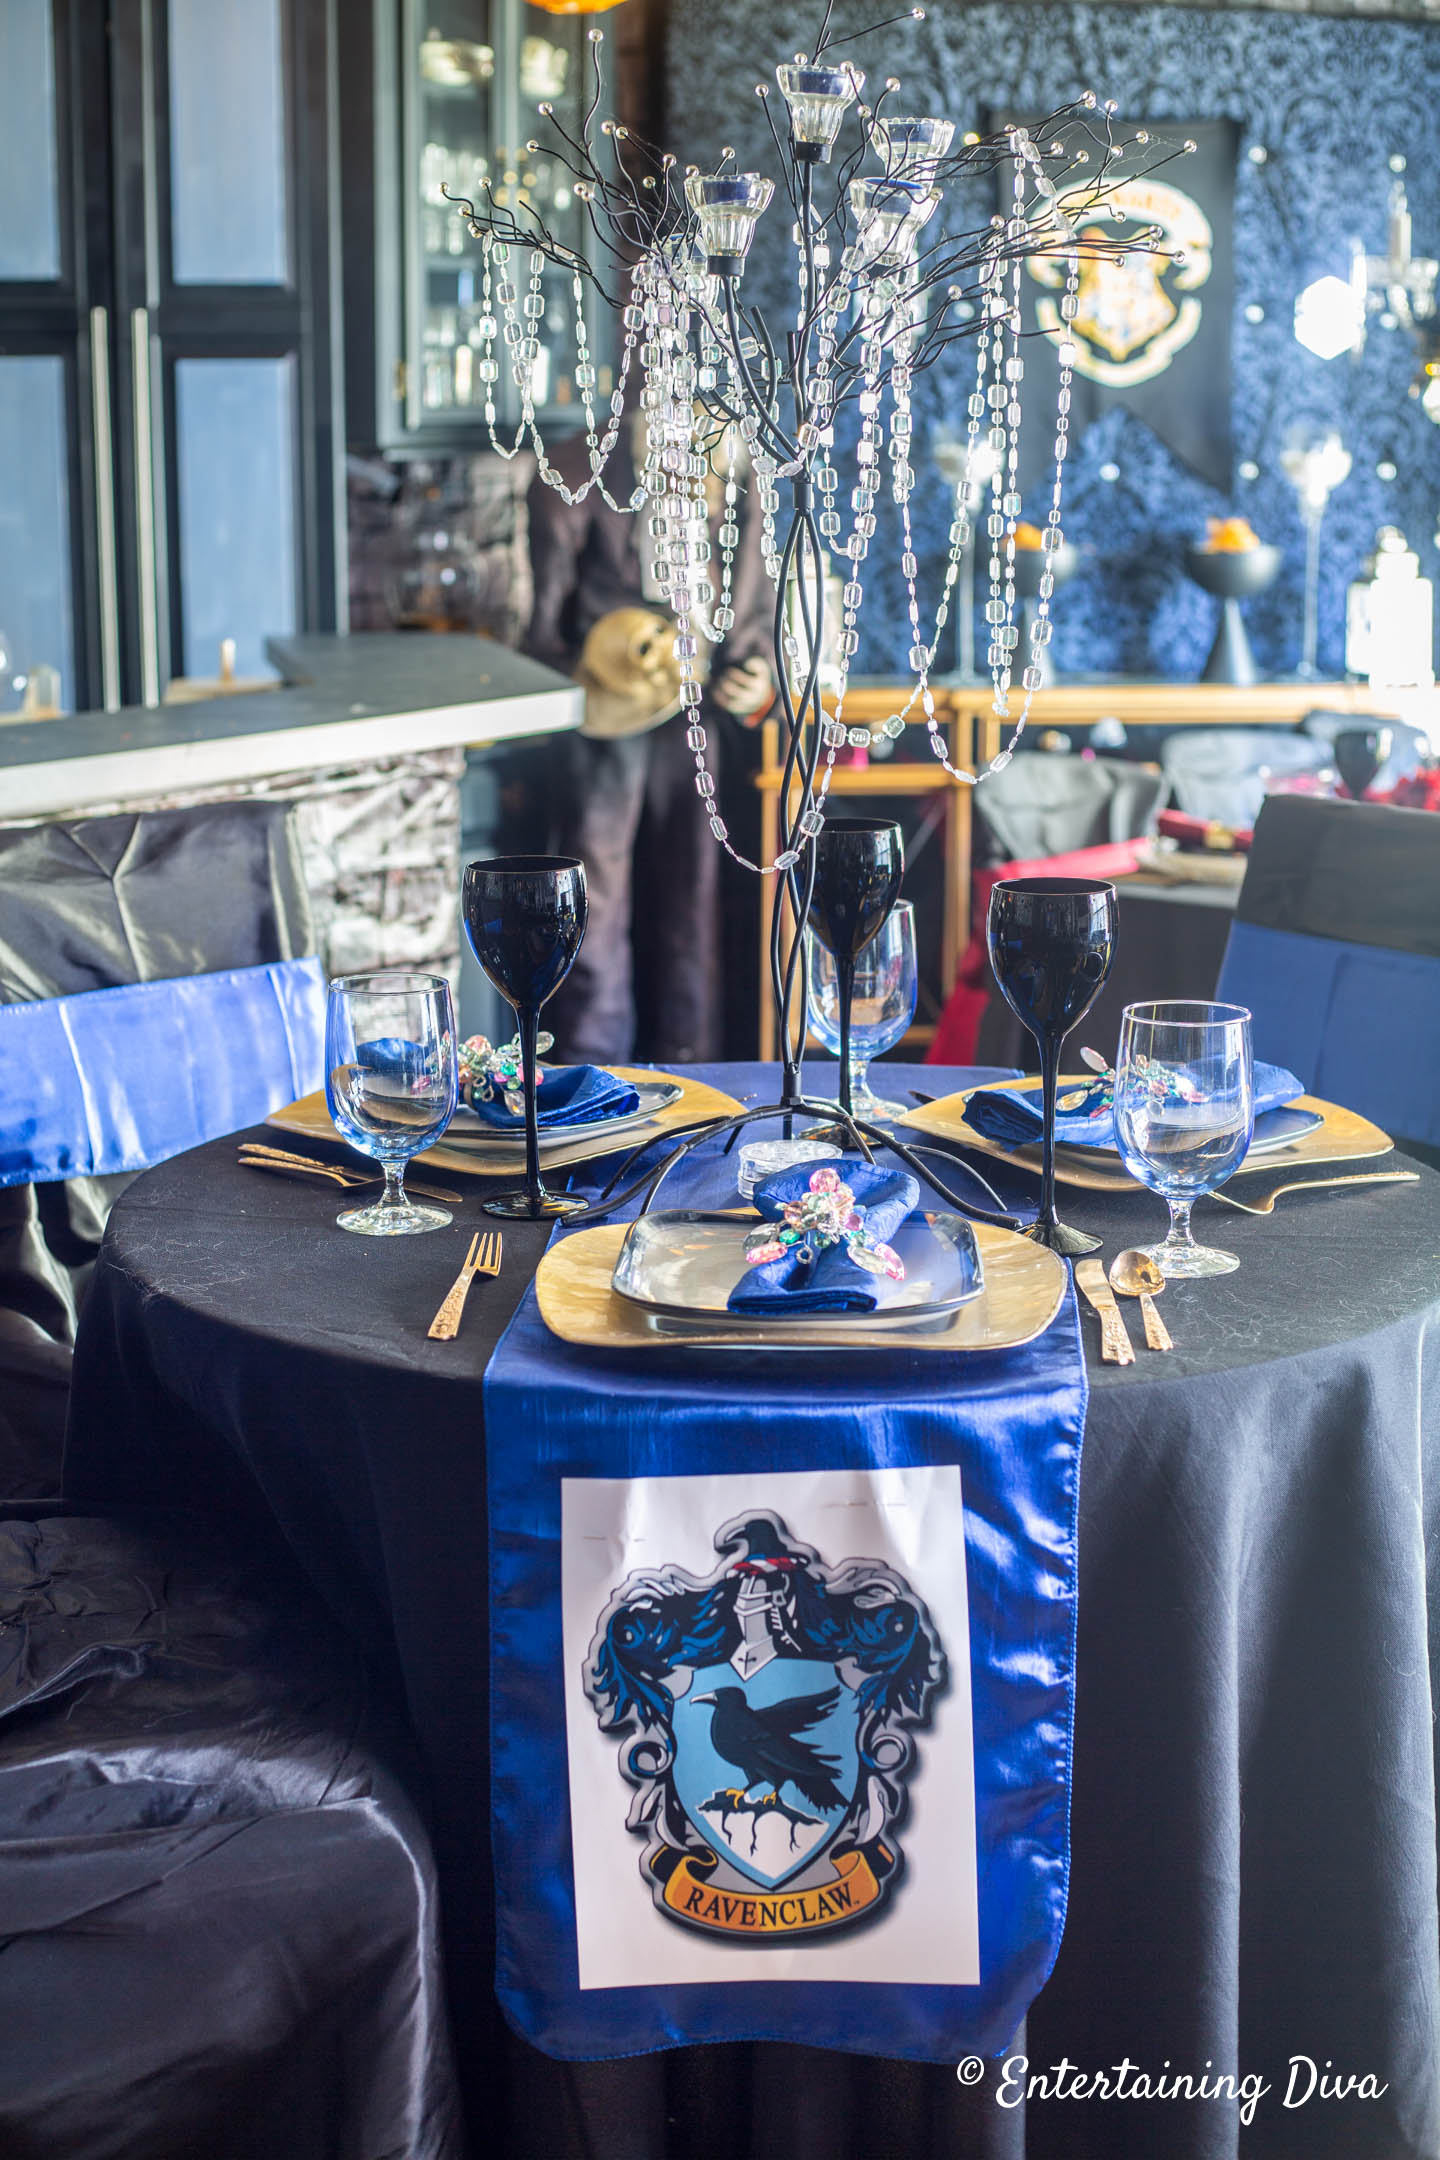 Blue and gold table decorations with a Slytherin crest on a blue table runner